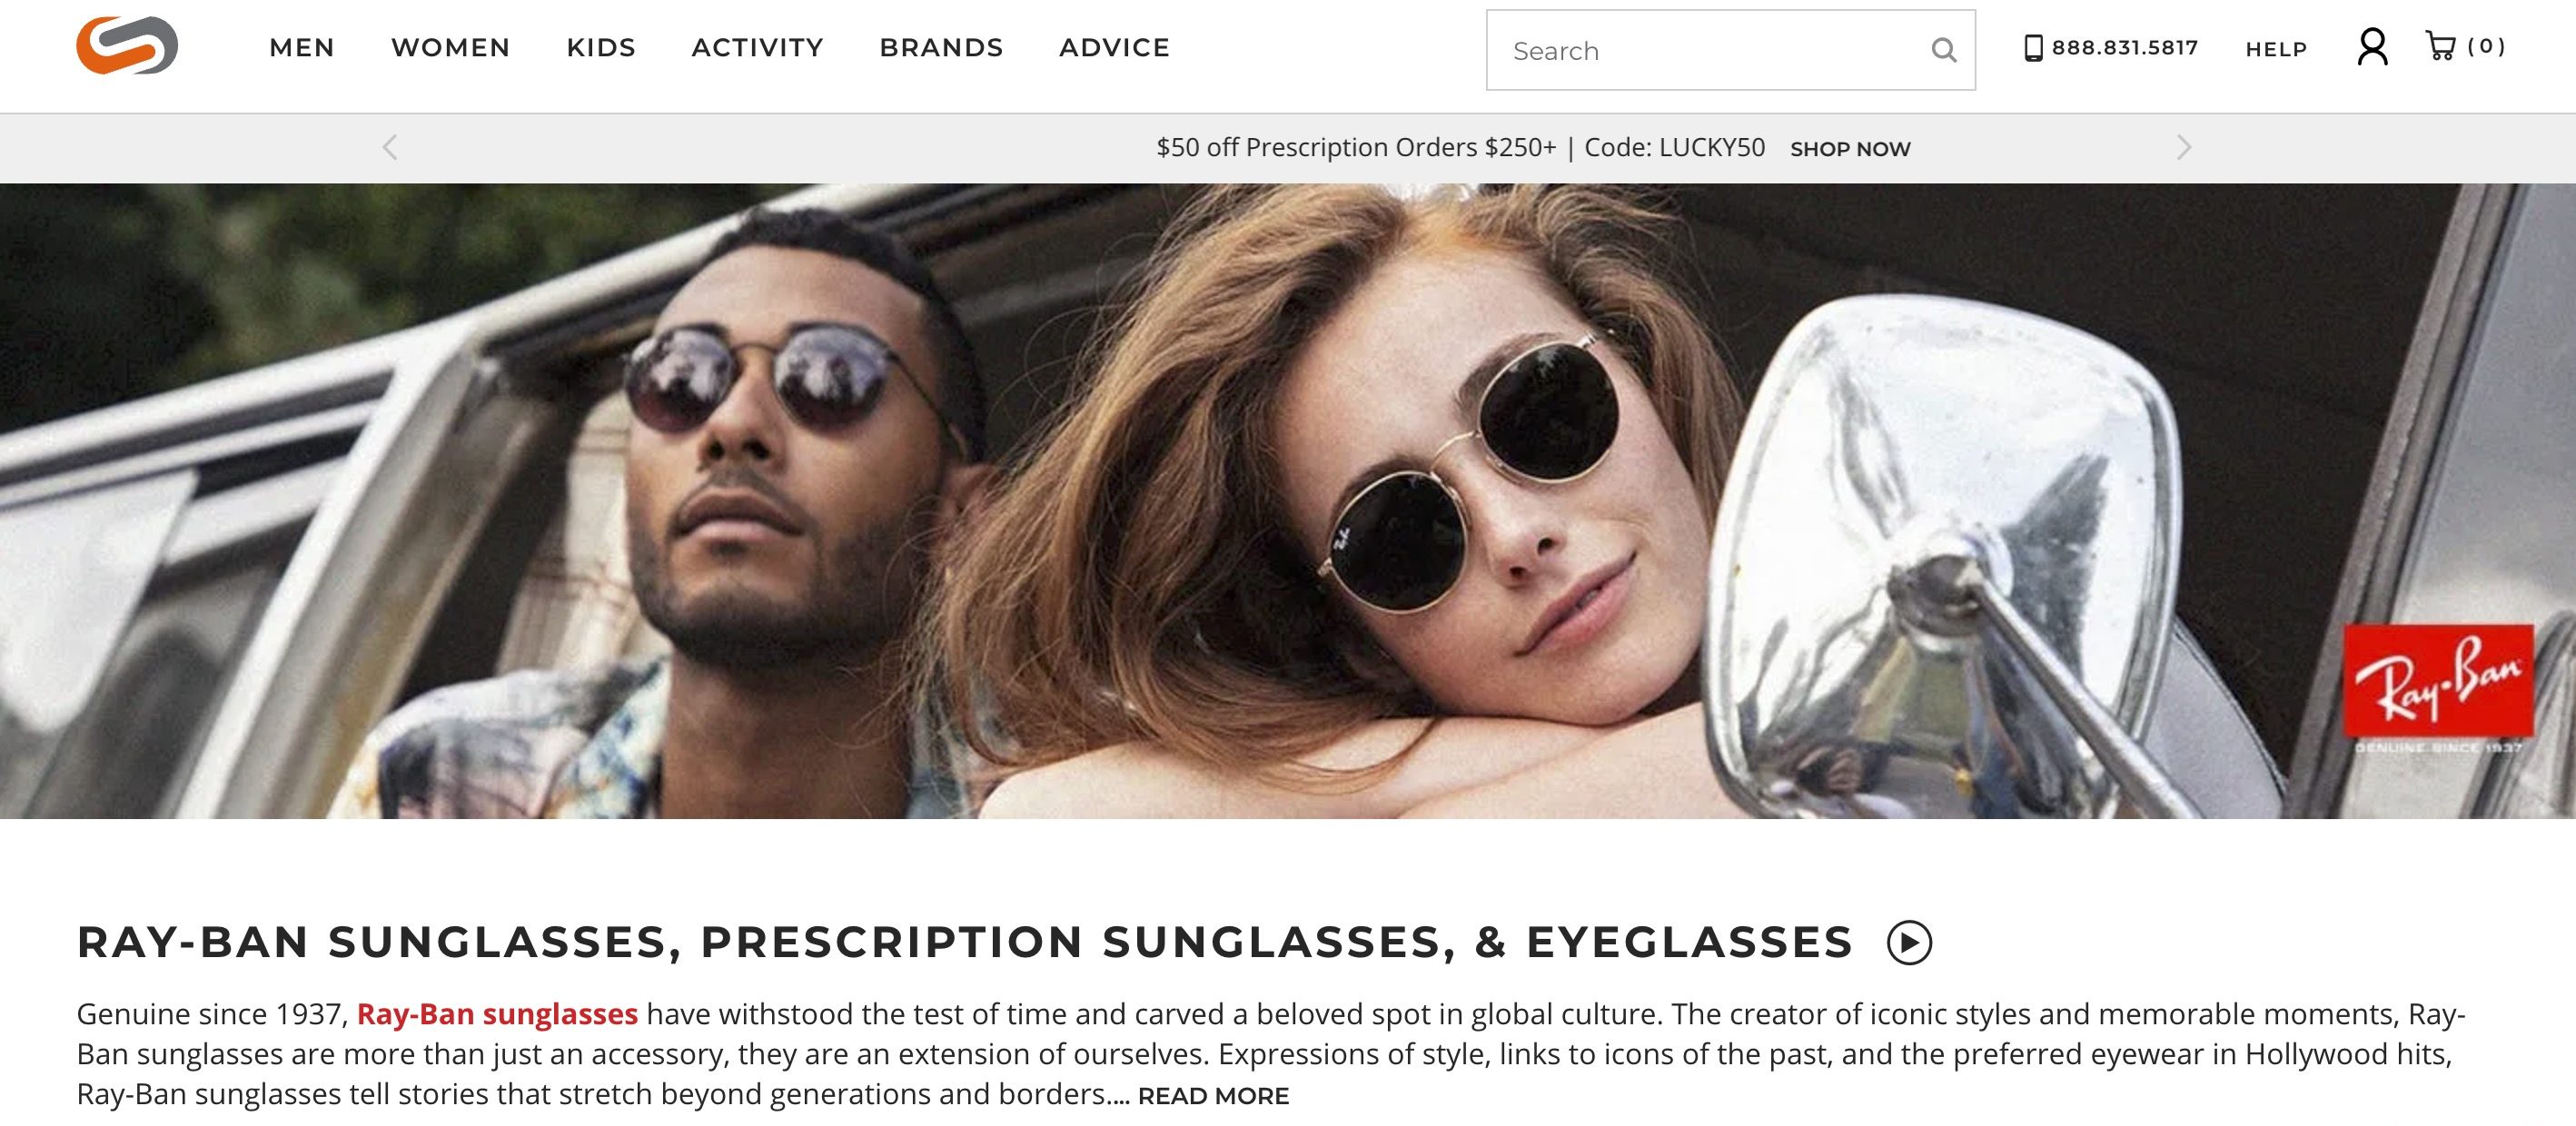 How to Buy Ray-Ban Eyeglasses Online at SportRx | SportRx